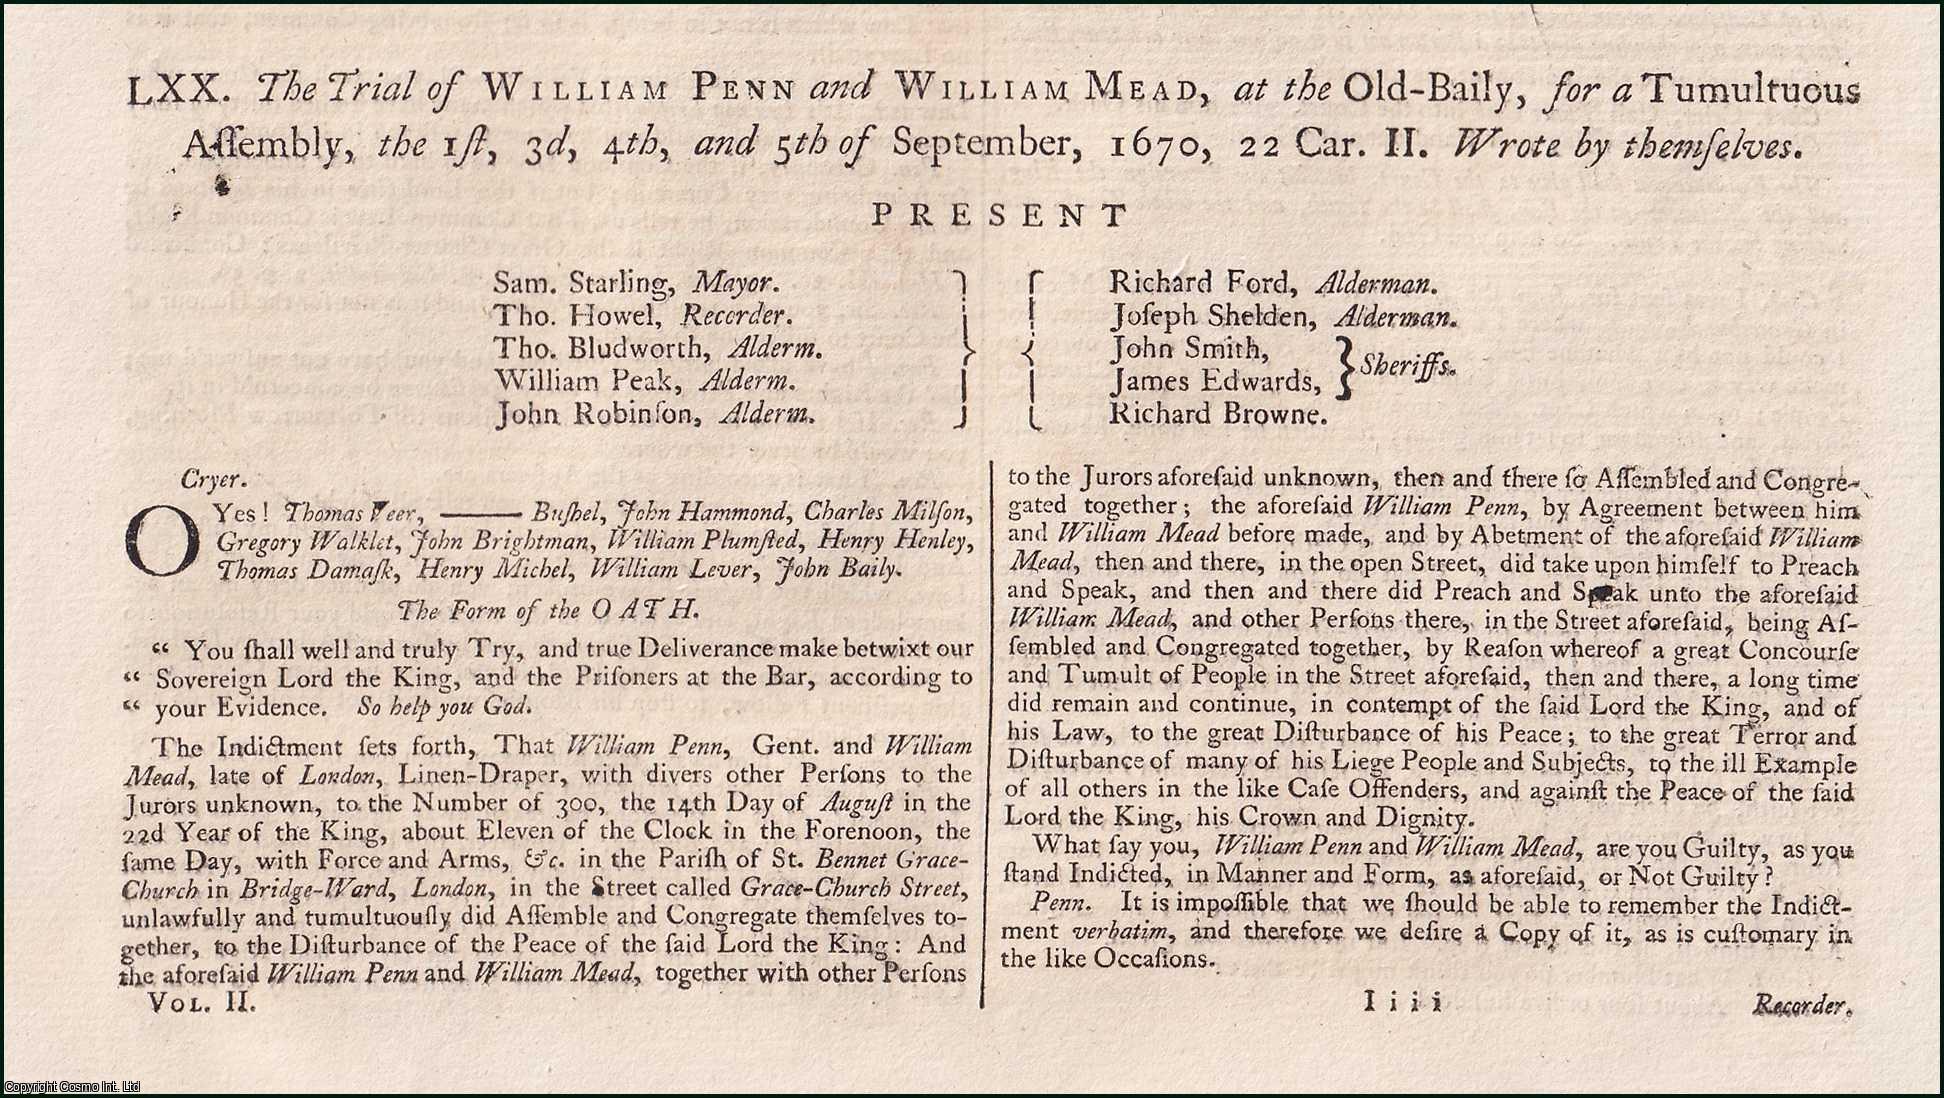 [Trial]. - The Trial of William Penn and William Mead, at the Old-Baily, for a Tumultuous Assembly, the 1st, 3rd, 4th, and 5th of September, 1670. An original report from the Collected State Trials.